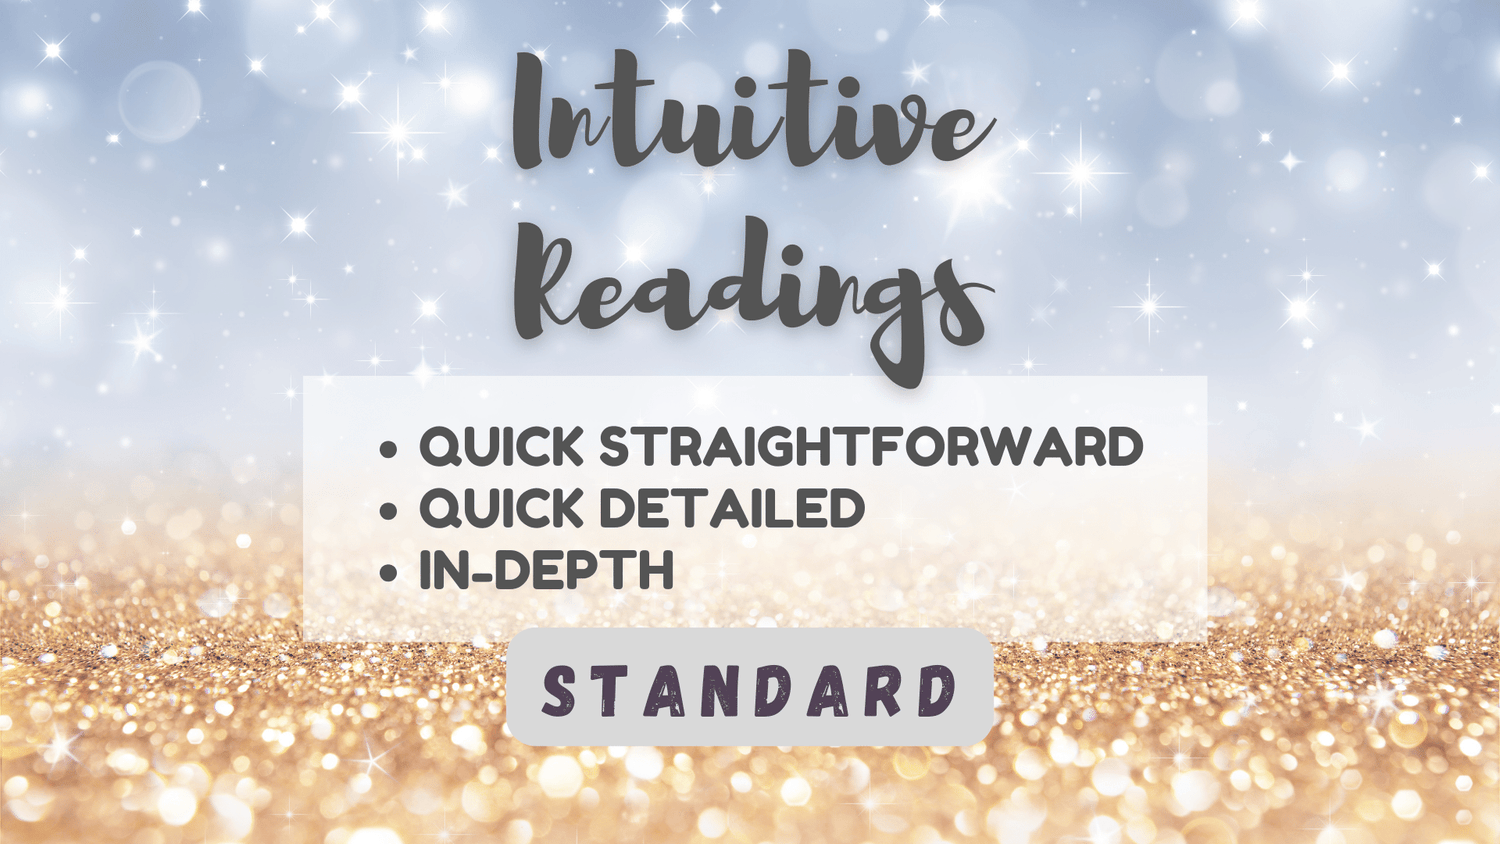 Standard - Intuitive Readings